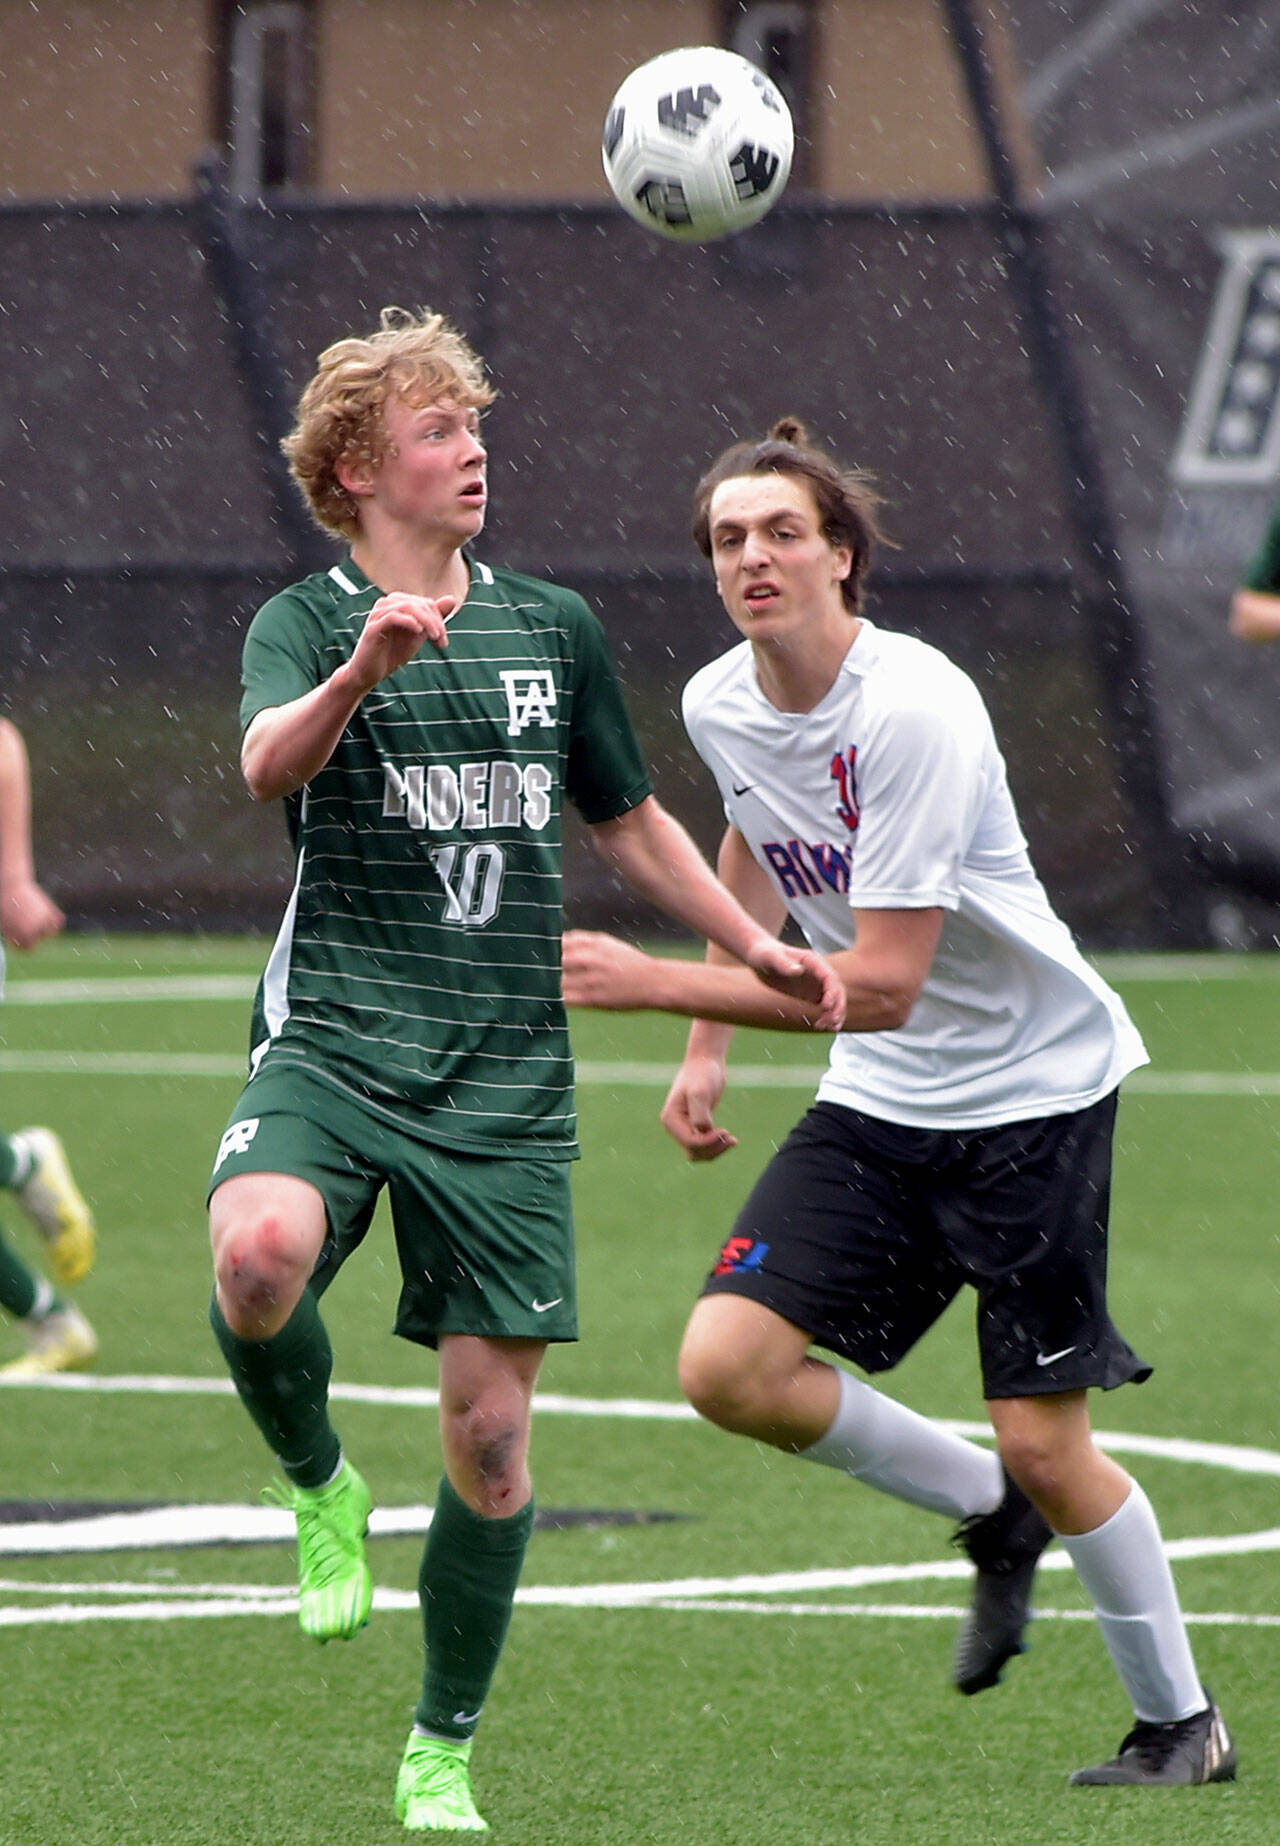 Port Angeles’ Matthew Miller, left, takes control of the ball ahead of East Jefferson’s Zephyr Bell on Saturday at Peninsula College. (Keith Thorpe/Peninsula Daily News)